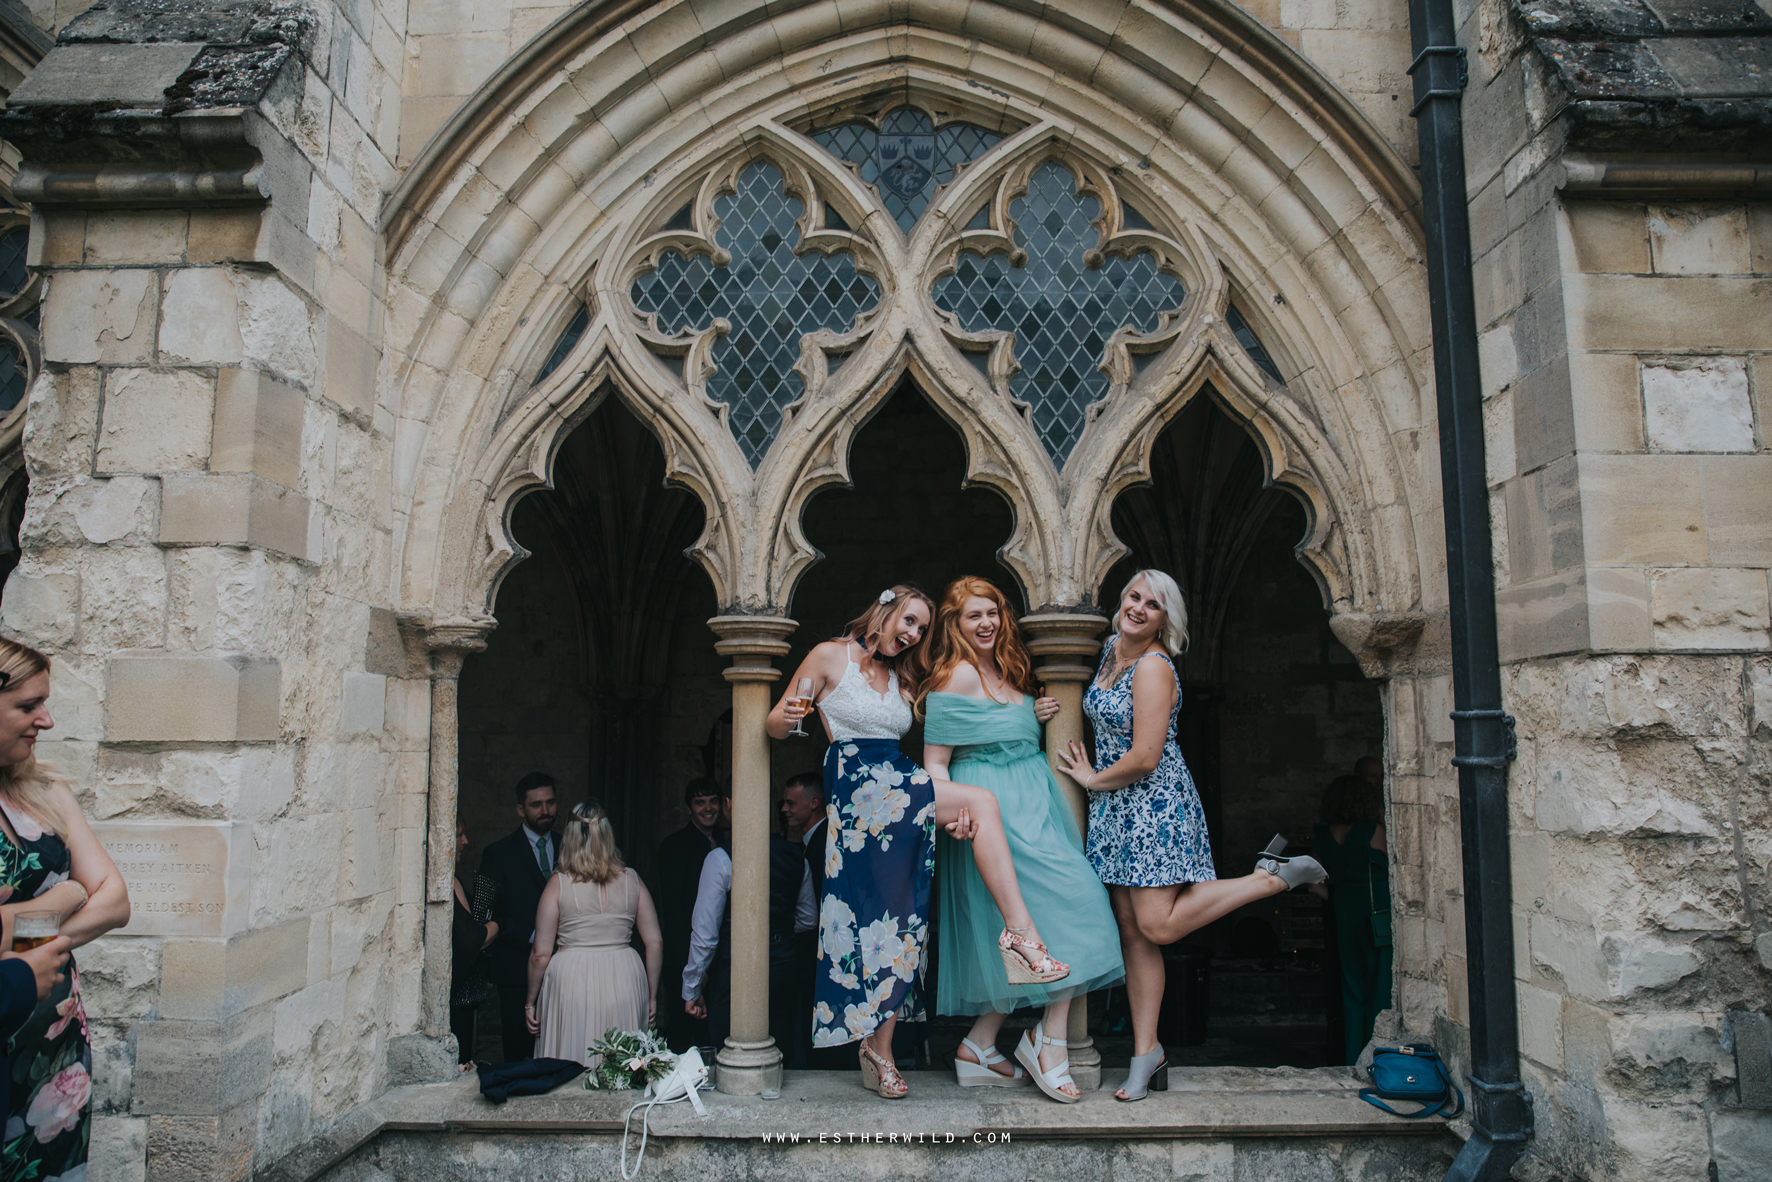 Norwich_Castle_Arcade_Grosvenor_Chip_Birdcage_Cathedral_Cloisters_Refectory_Wedding_Photography_Esther_Wild_Photographer_Norfolk_Kings_Lynn_3R8A1979.jpg